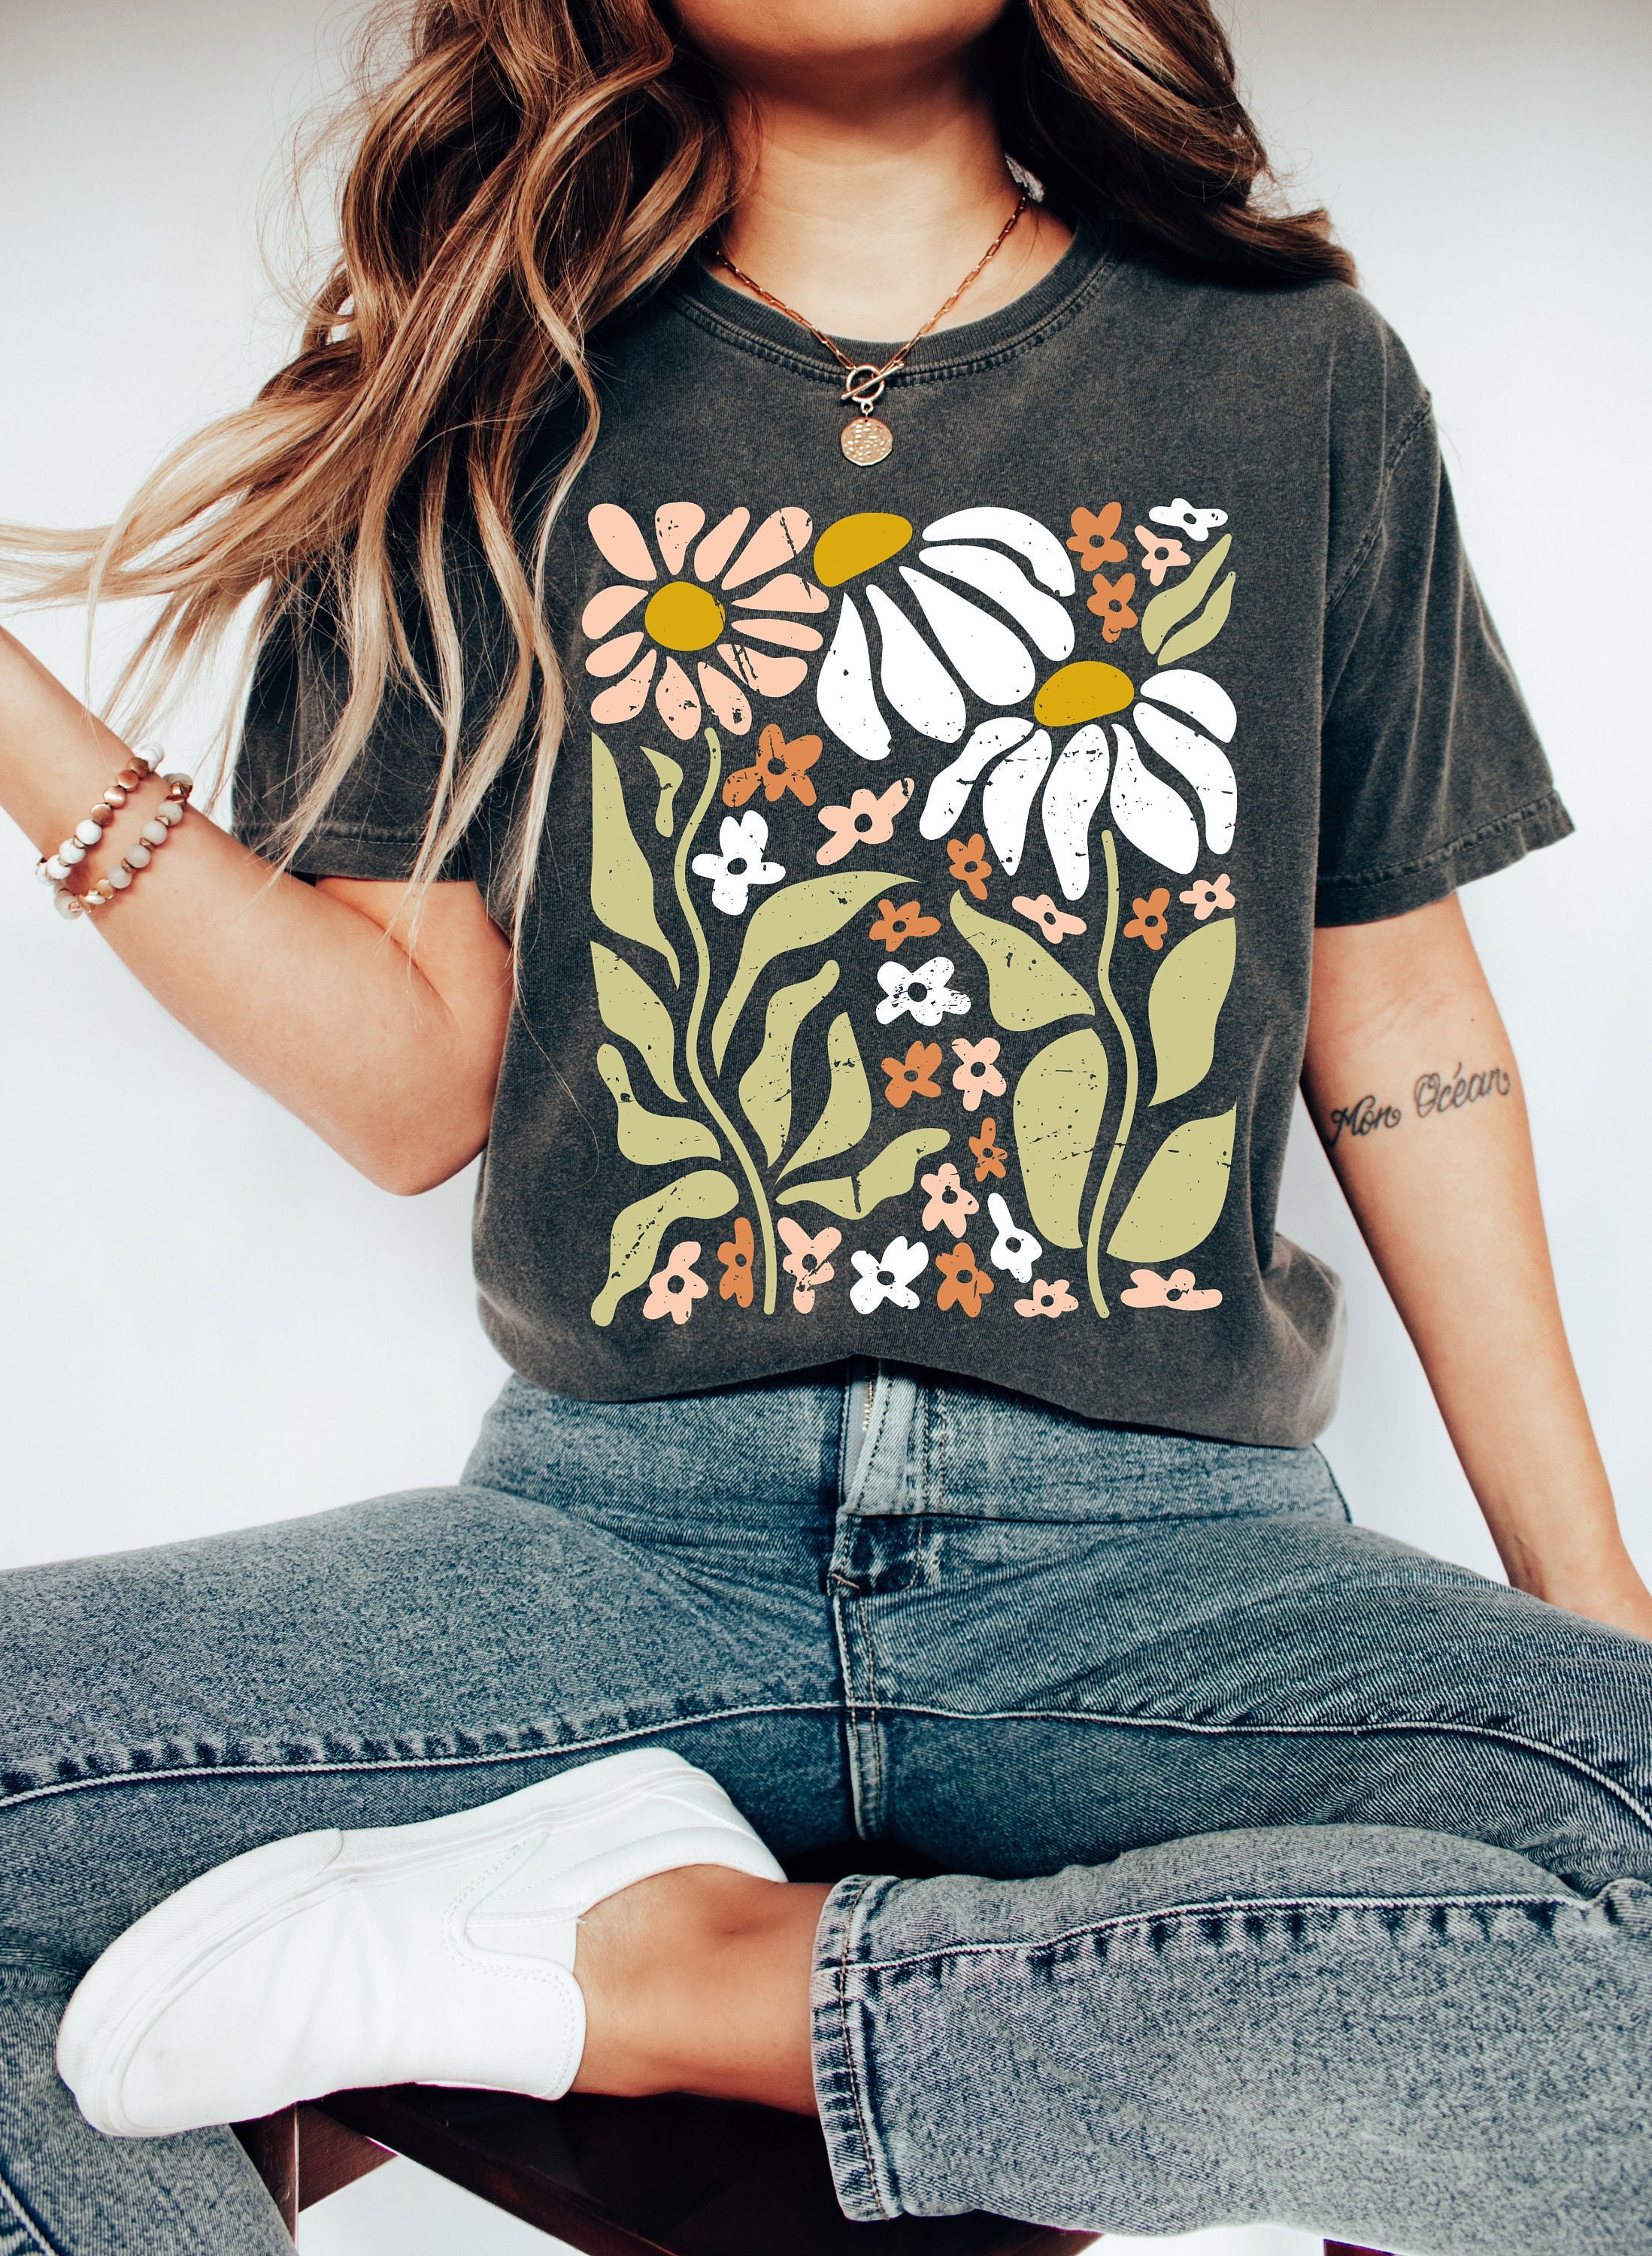 Discover Comfort Colors Flowers T-Shirt, Boho Wildflowers Floral Nature Shirt